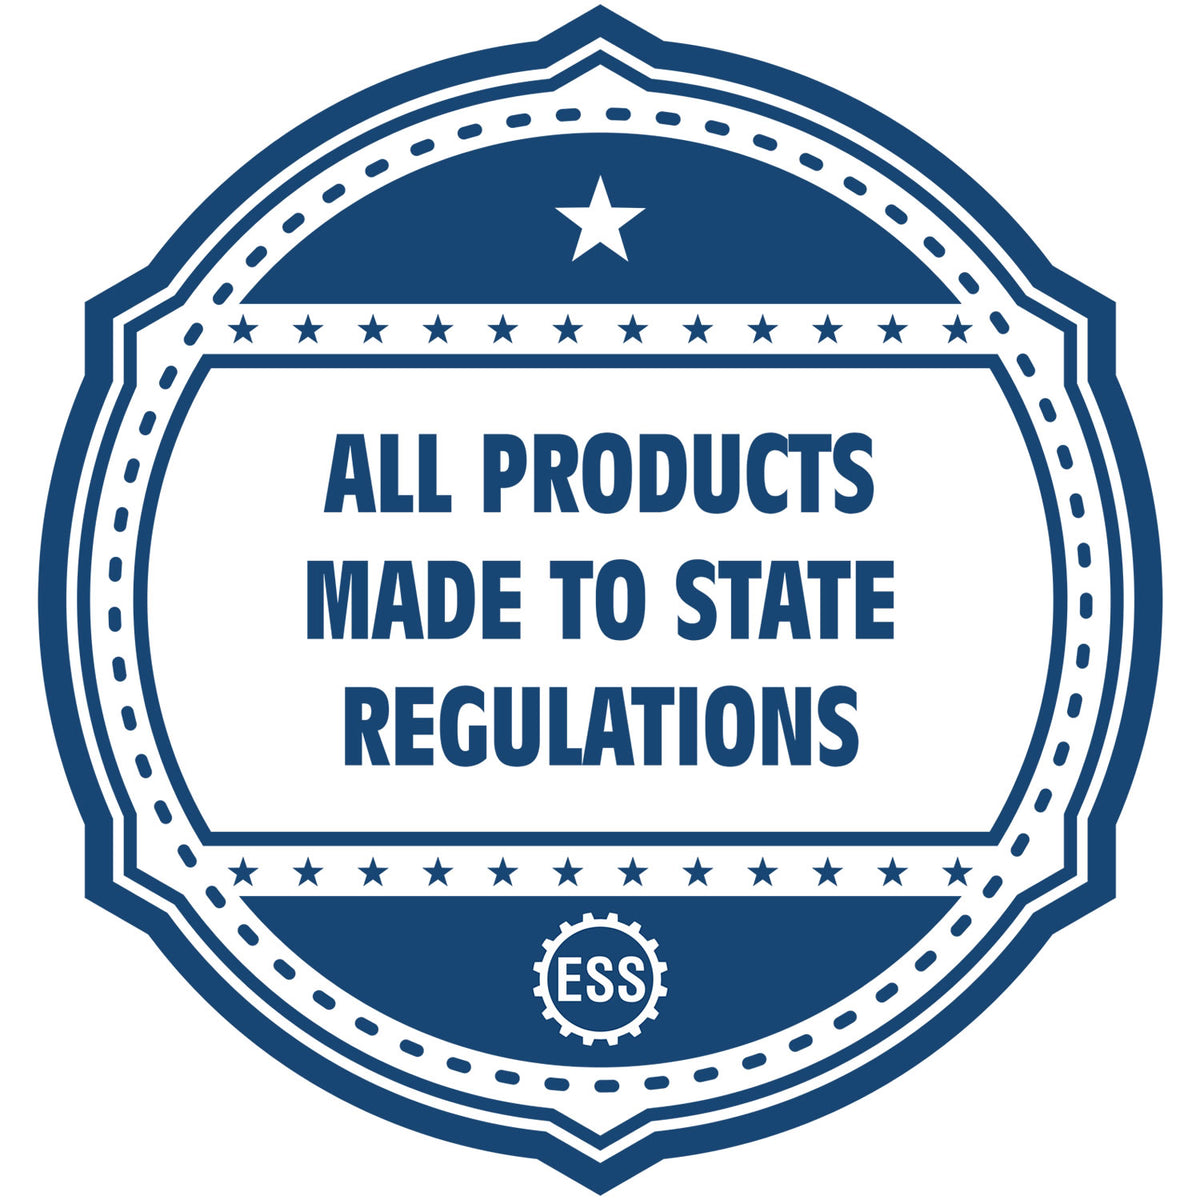 An icon or badge element for the Slim Pre-Inked Wisconsin Landscape Architect Seal Stamp showing that this product is made in compliance with state regulations.